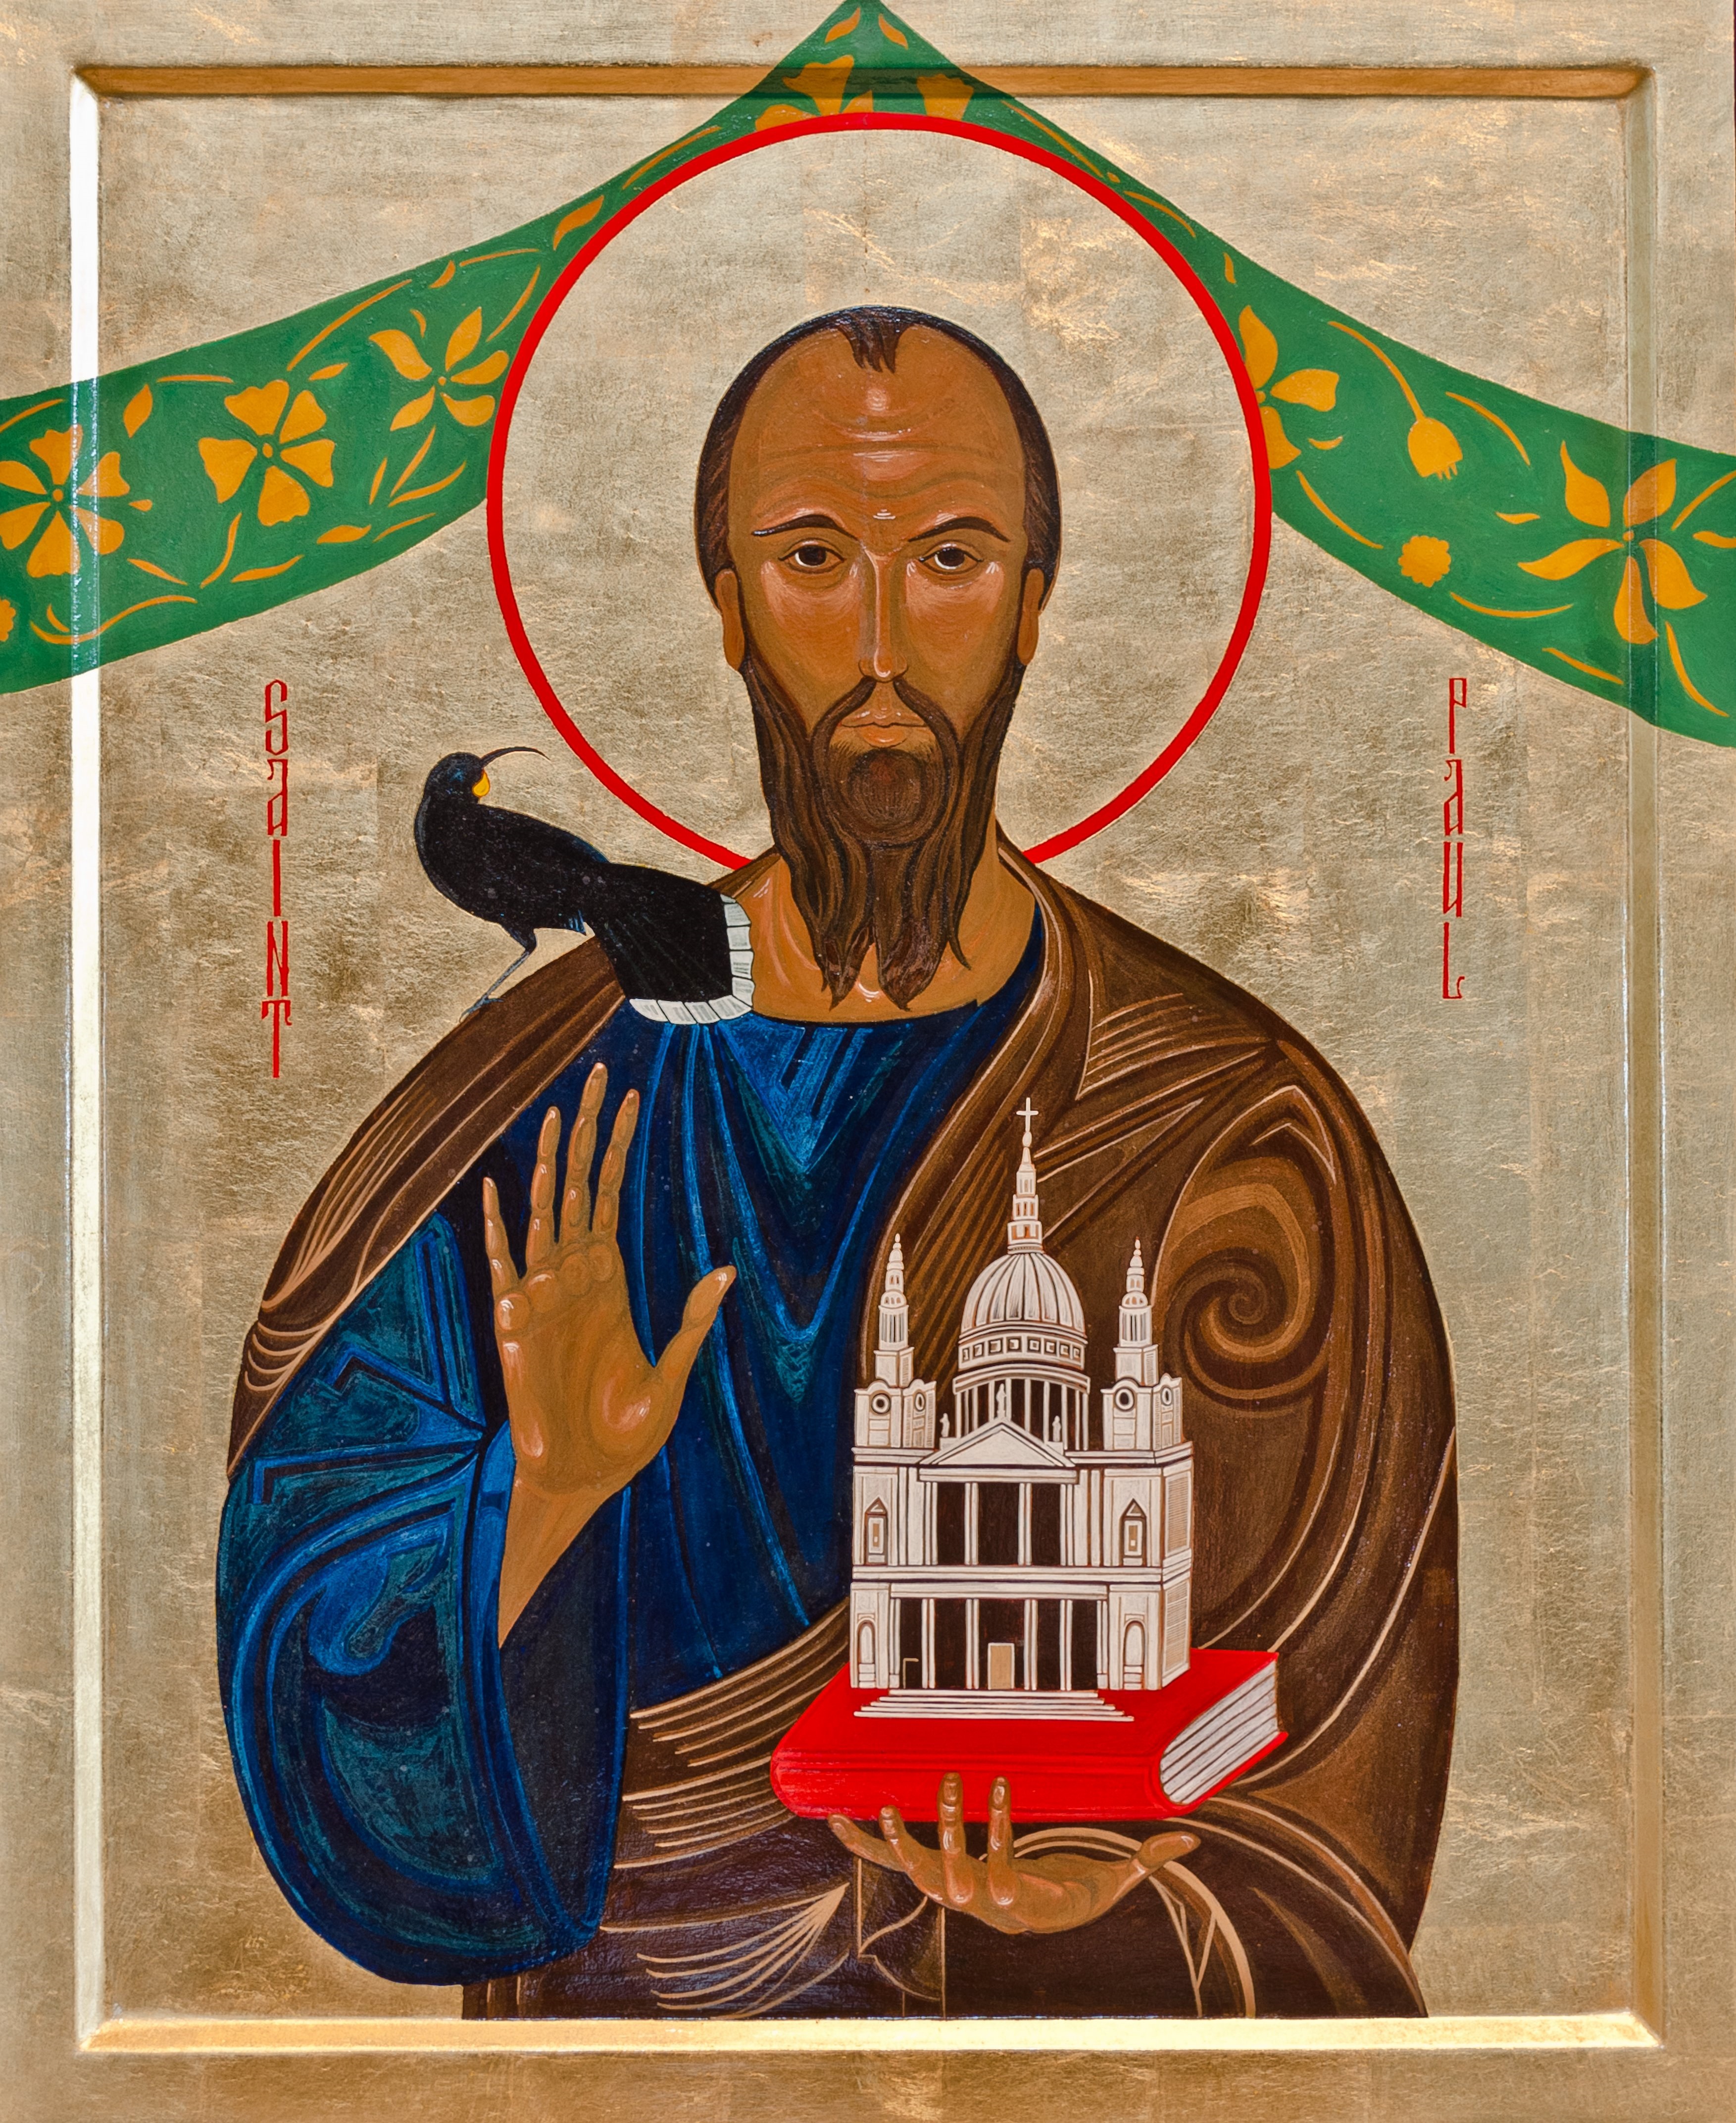 A photo of the icon of St Paul in the cathedral